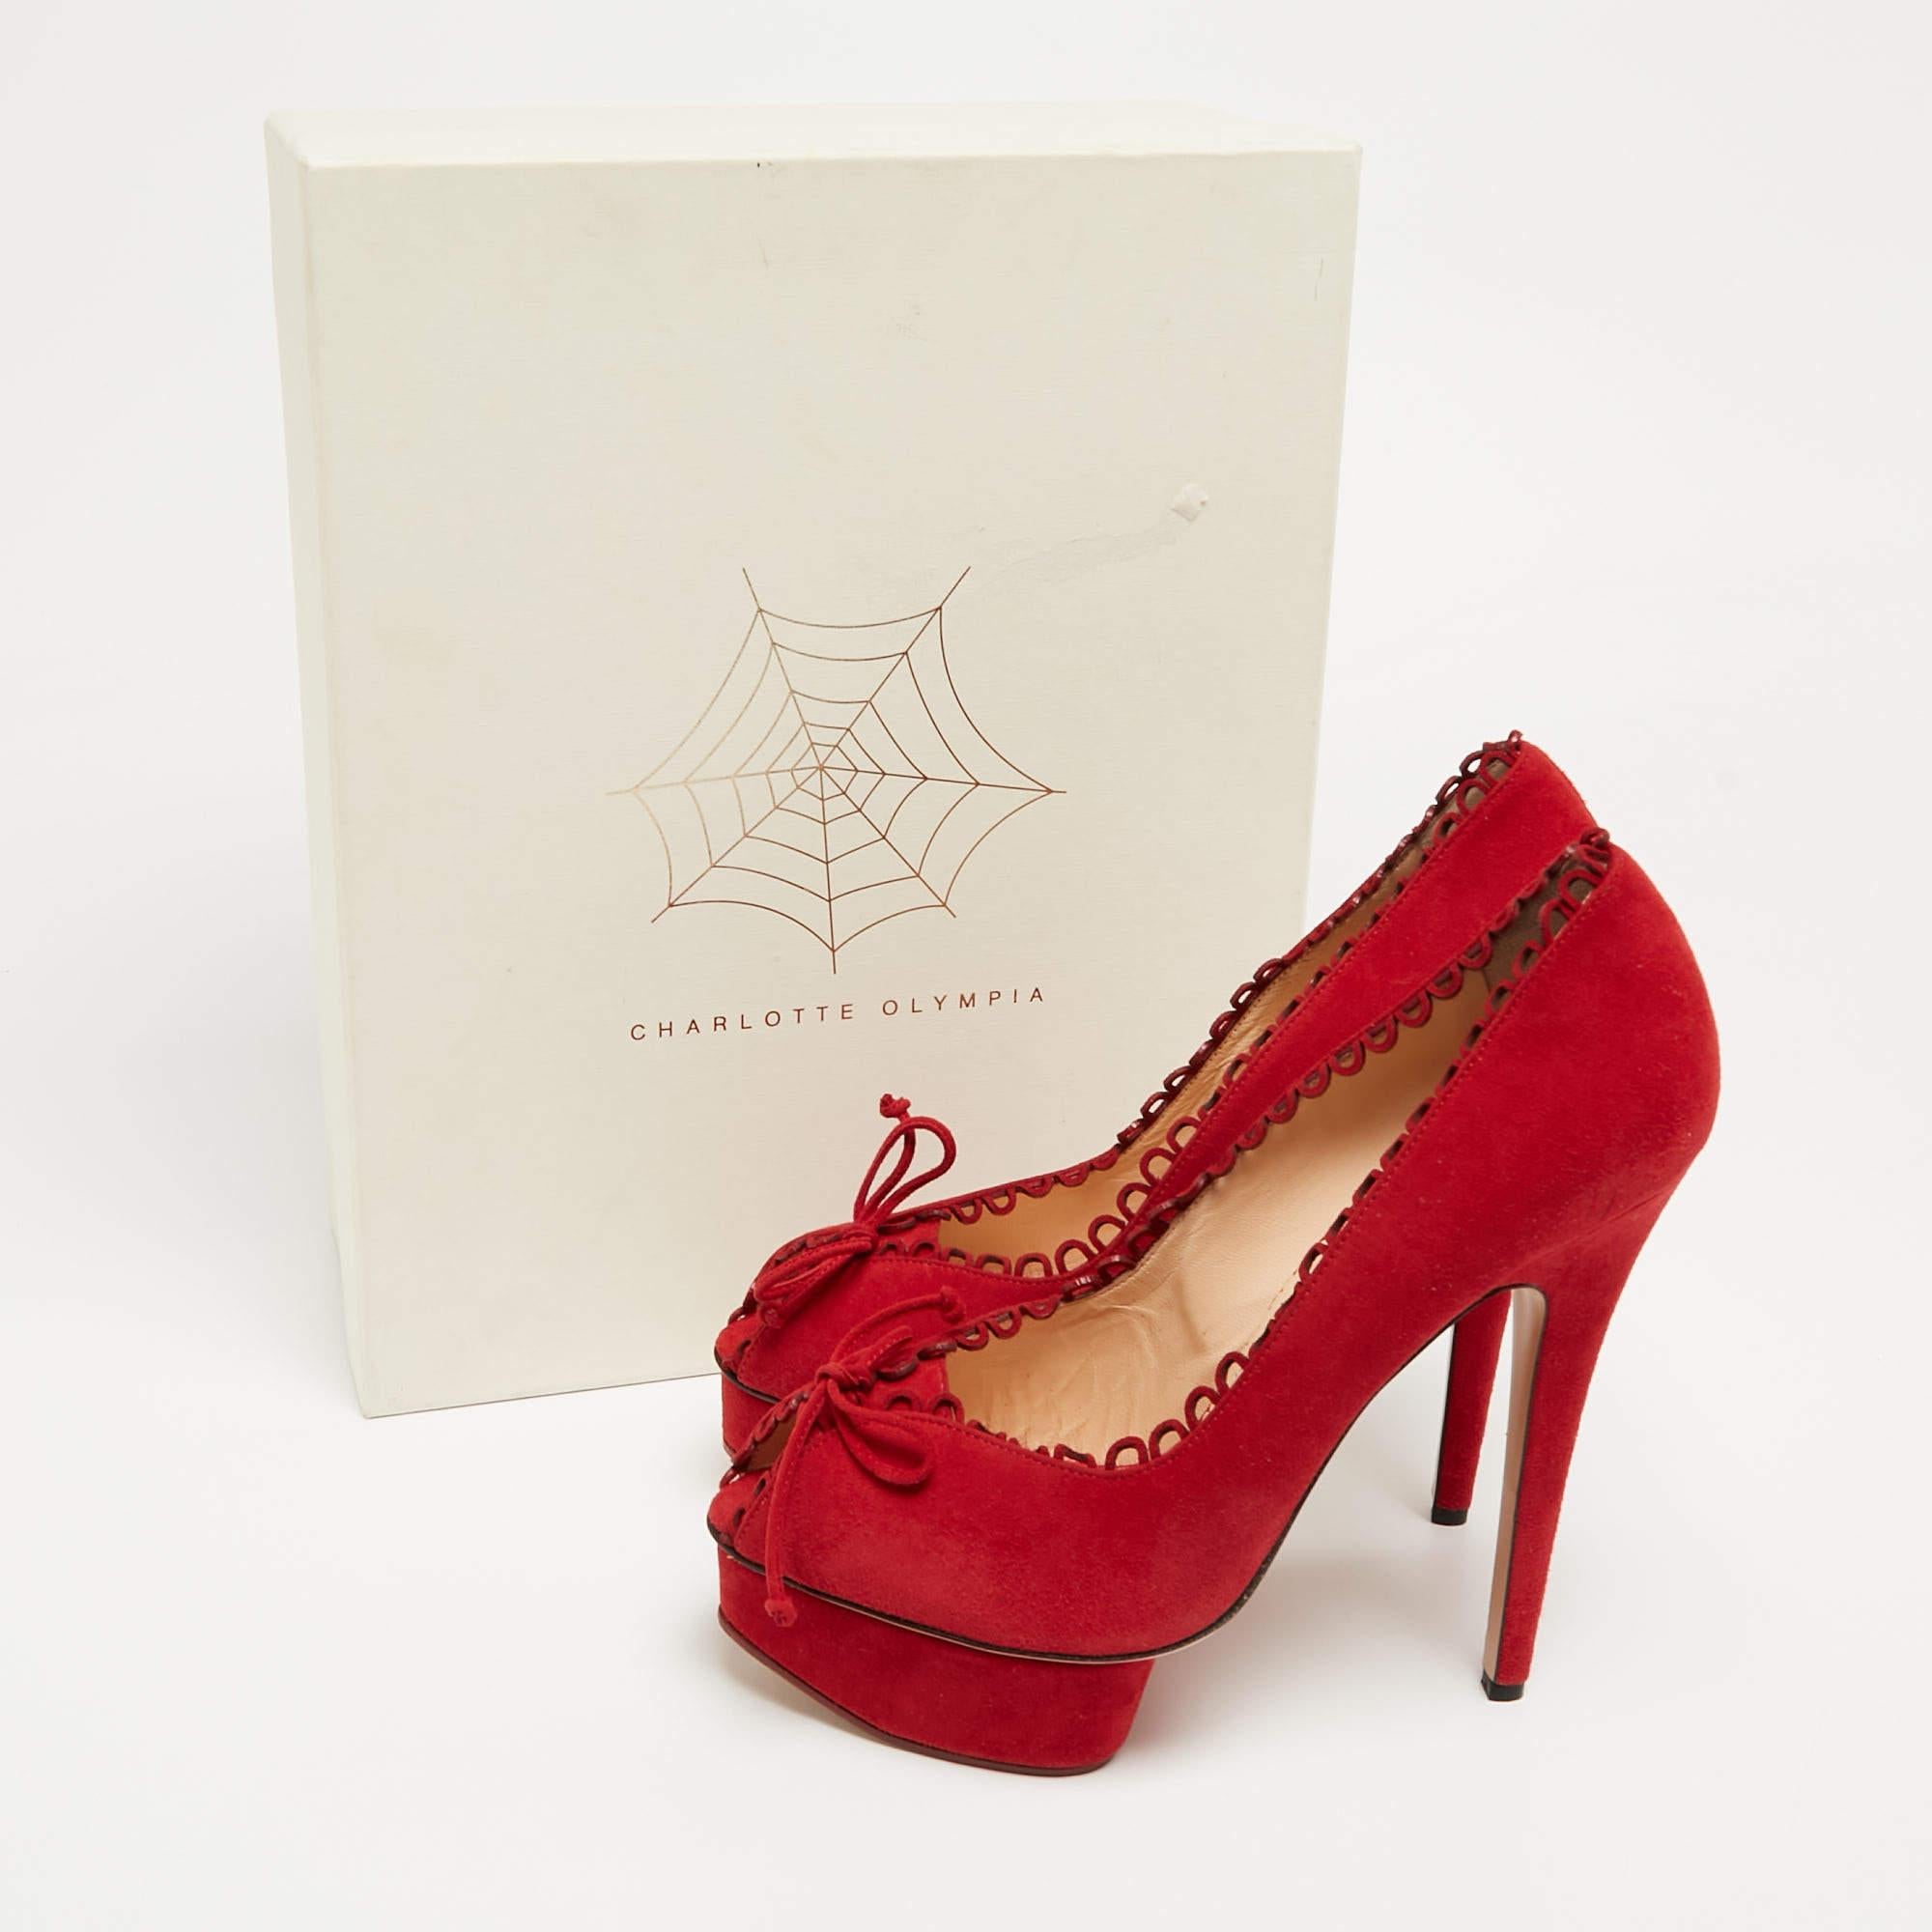 Charlotte Olympia Red Suede Daphne Scalloped Trim Peep ToePumps Size 40.5 For Sale 4